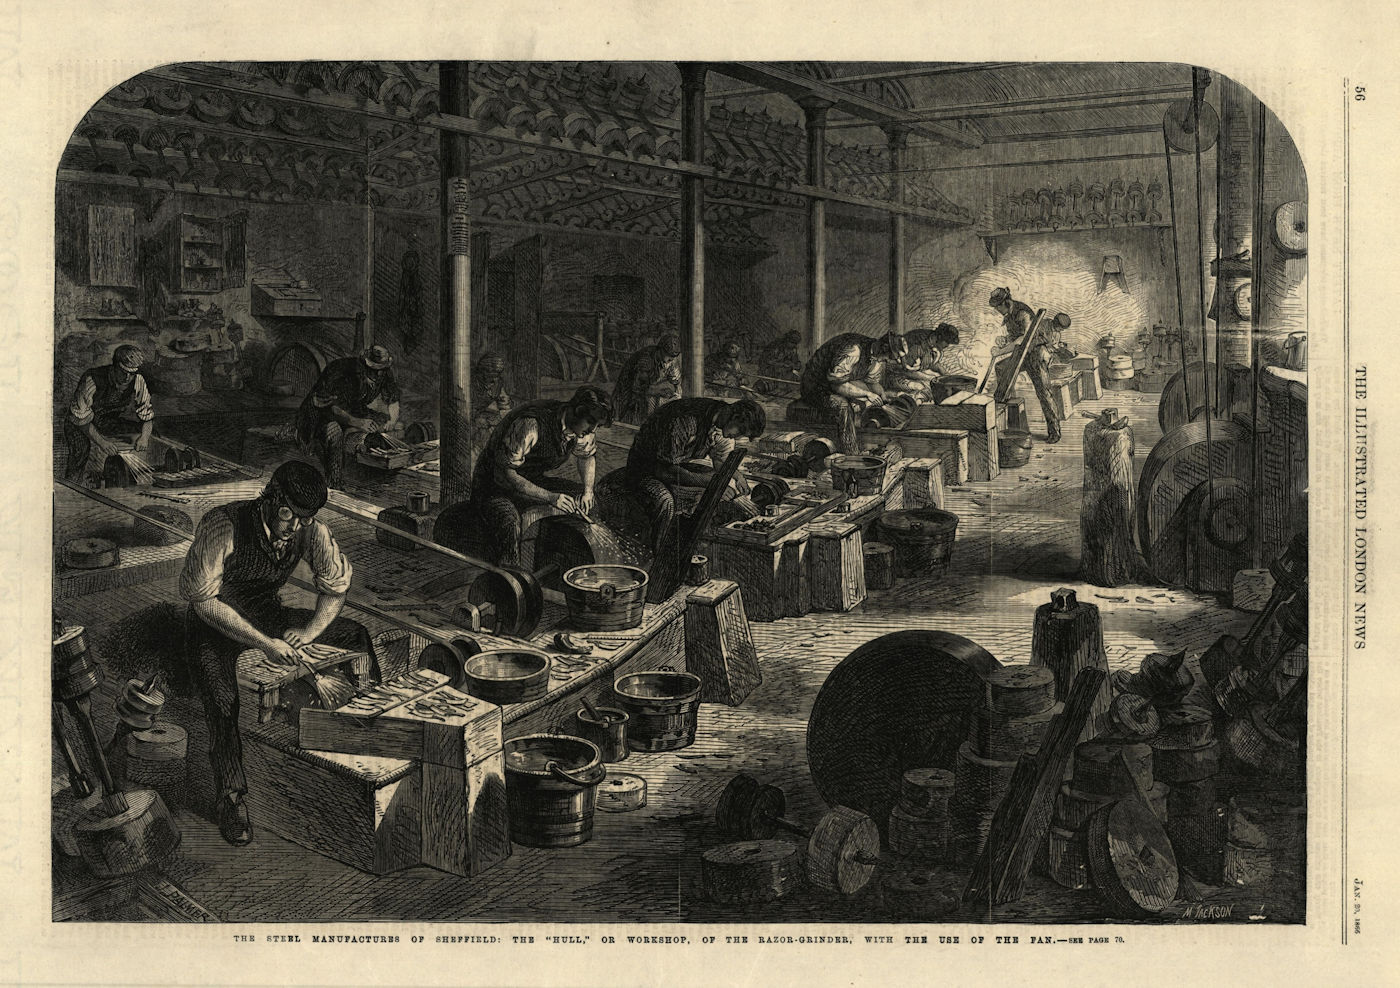 Sheffield steel manufacturing: The Hull, or workshop, of the razor-grinder 1866